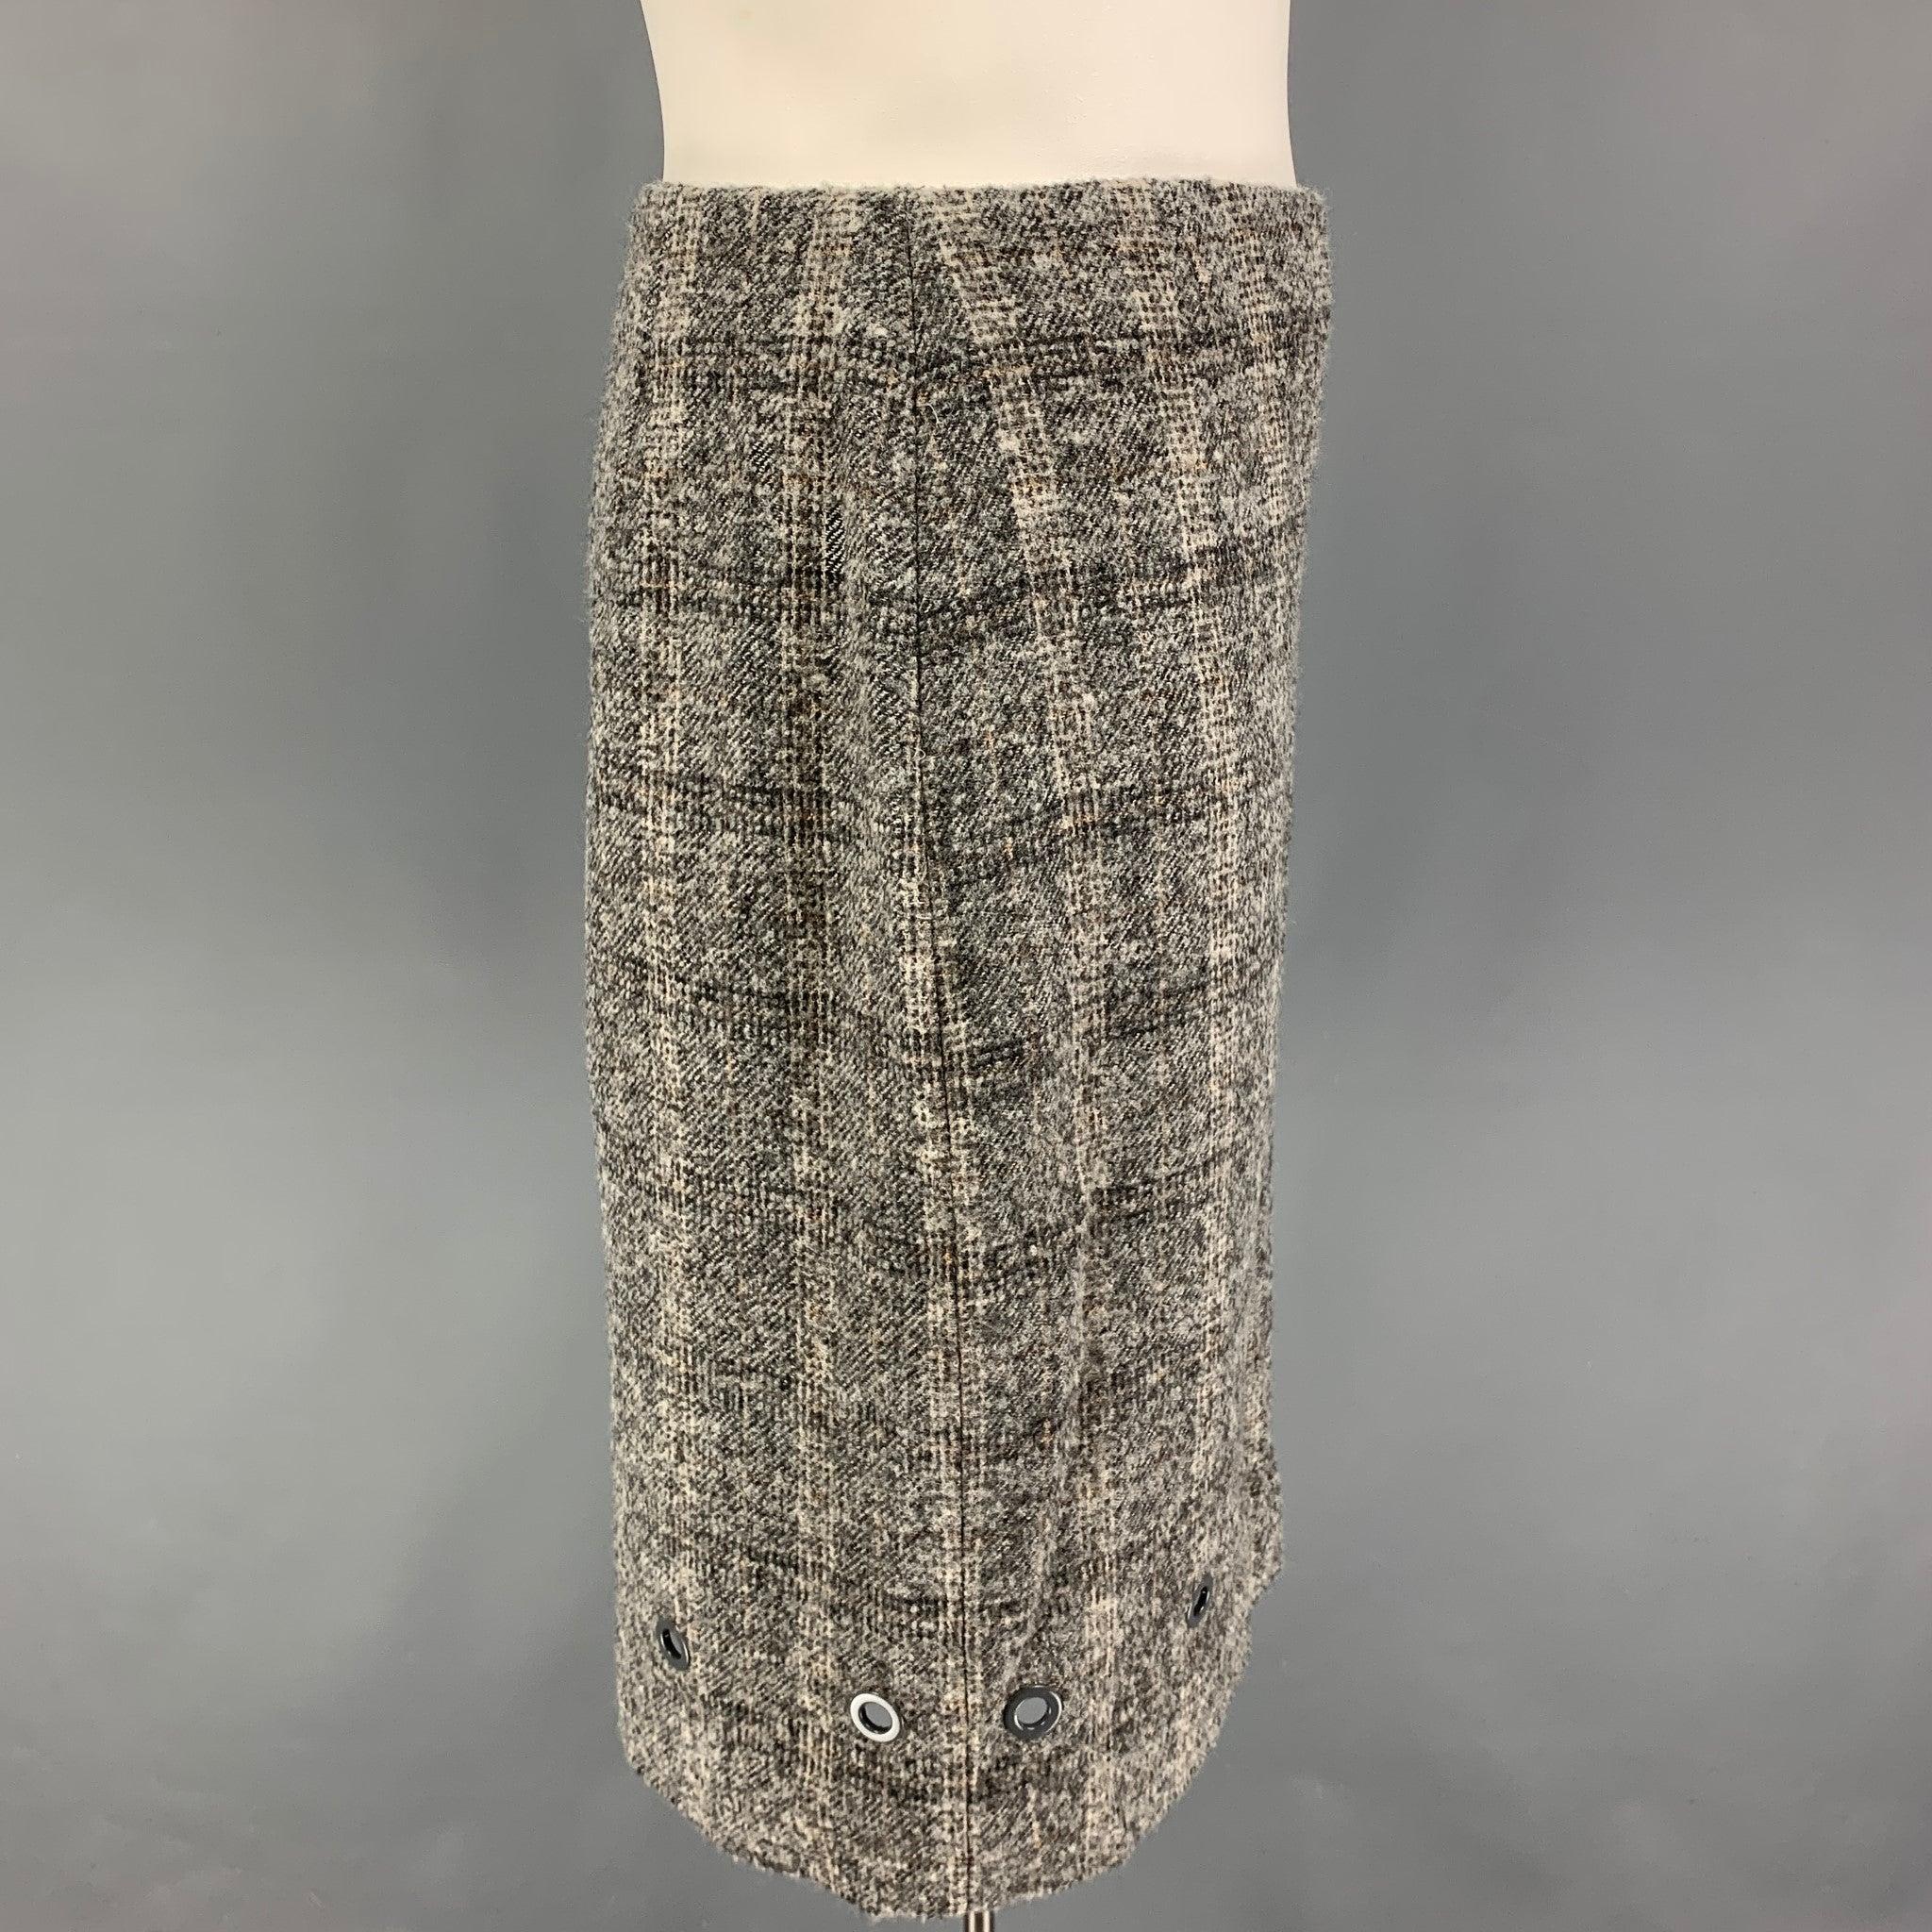 VALENTINO skirt comes in a grey & cream wool / polyamide with a slip liner featuring a pencil style, metal ring details, and a side zipper closure.
Very Good
Pre-Owned Condition. 

Marked:   48/12 

Measurements: 
  Waist: 32 inches  Hip: 44 inches 